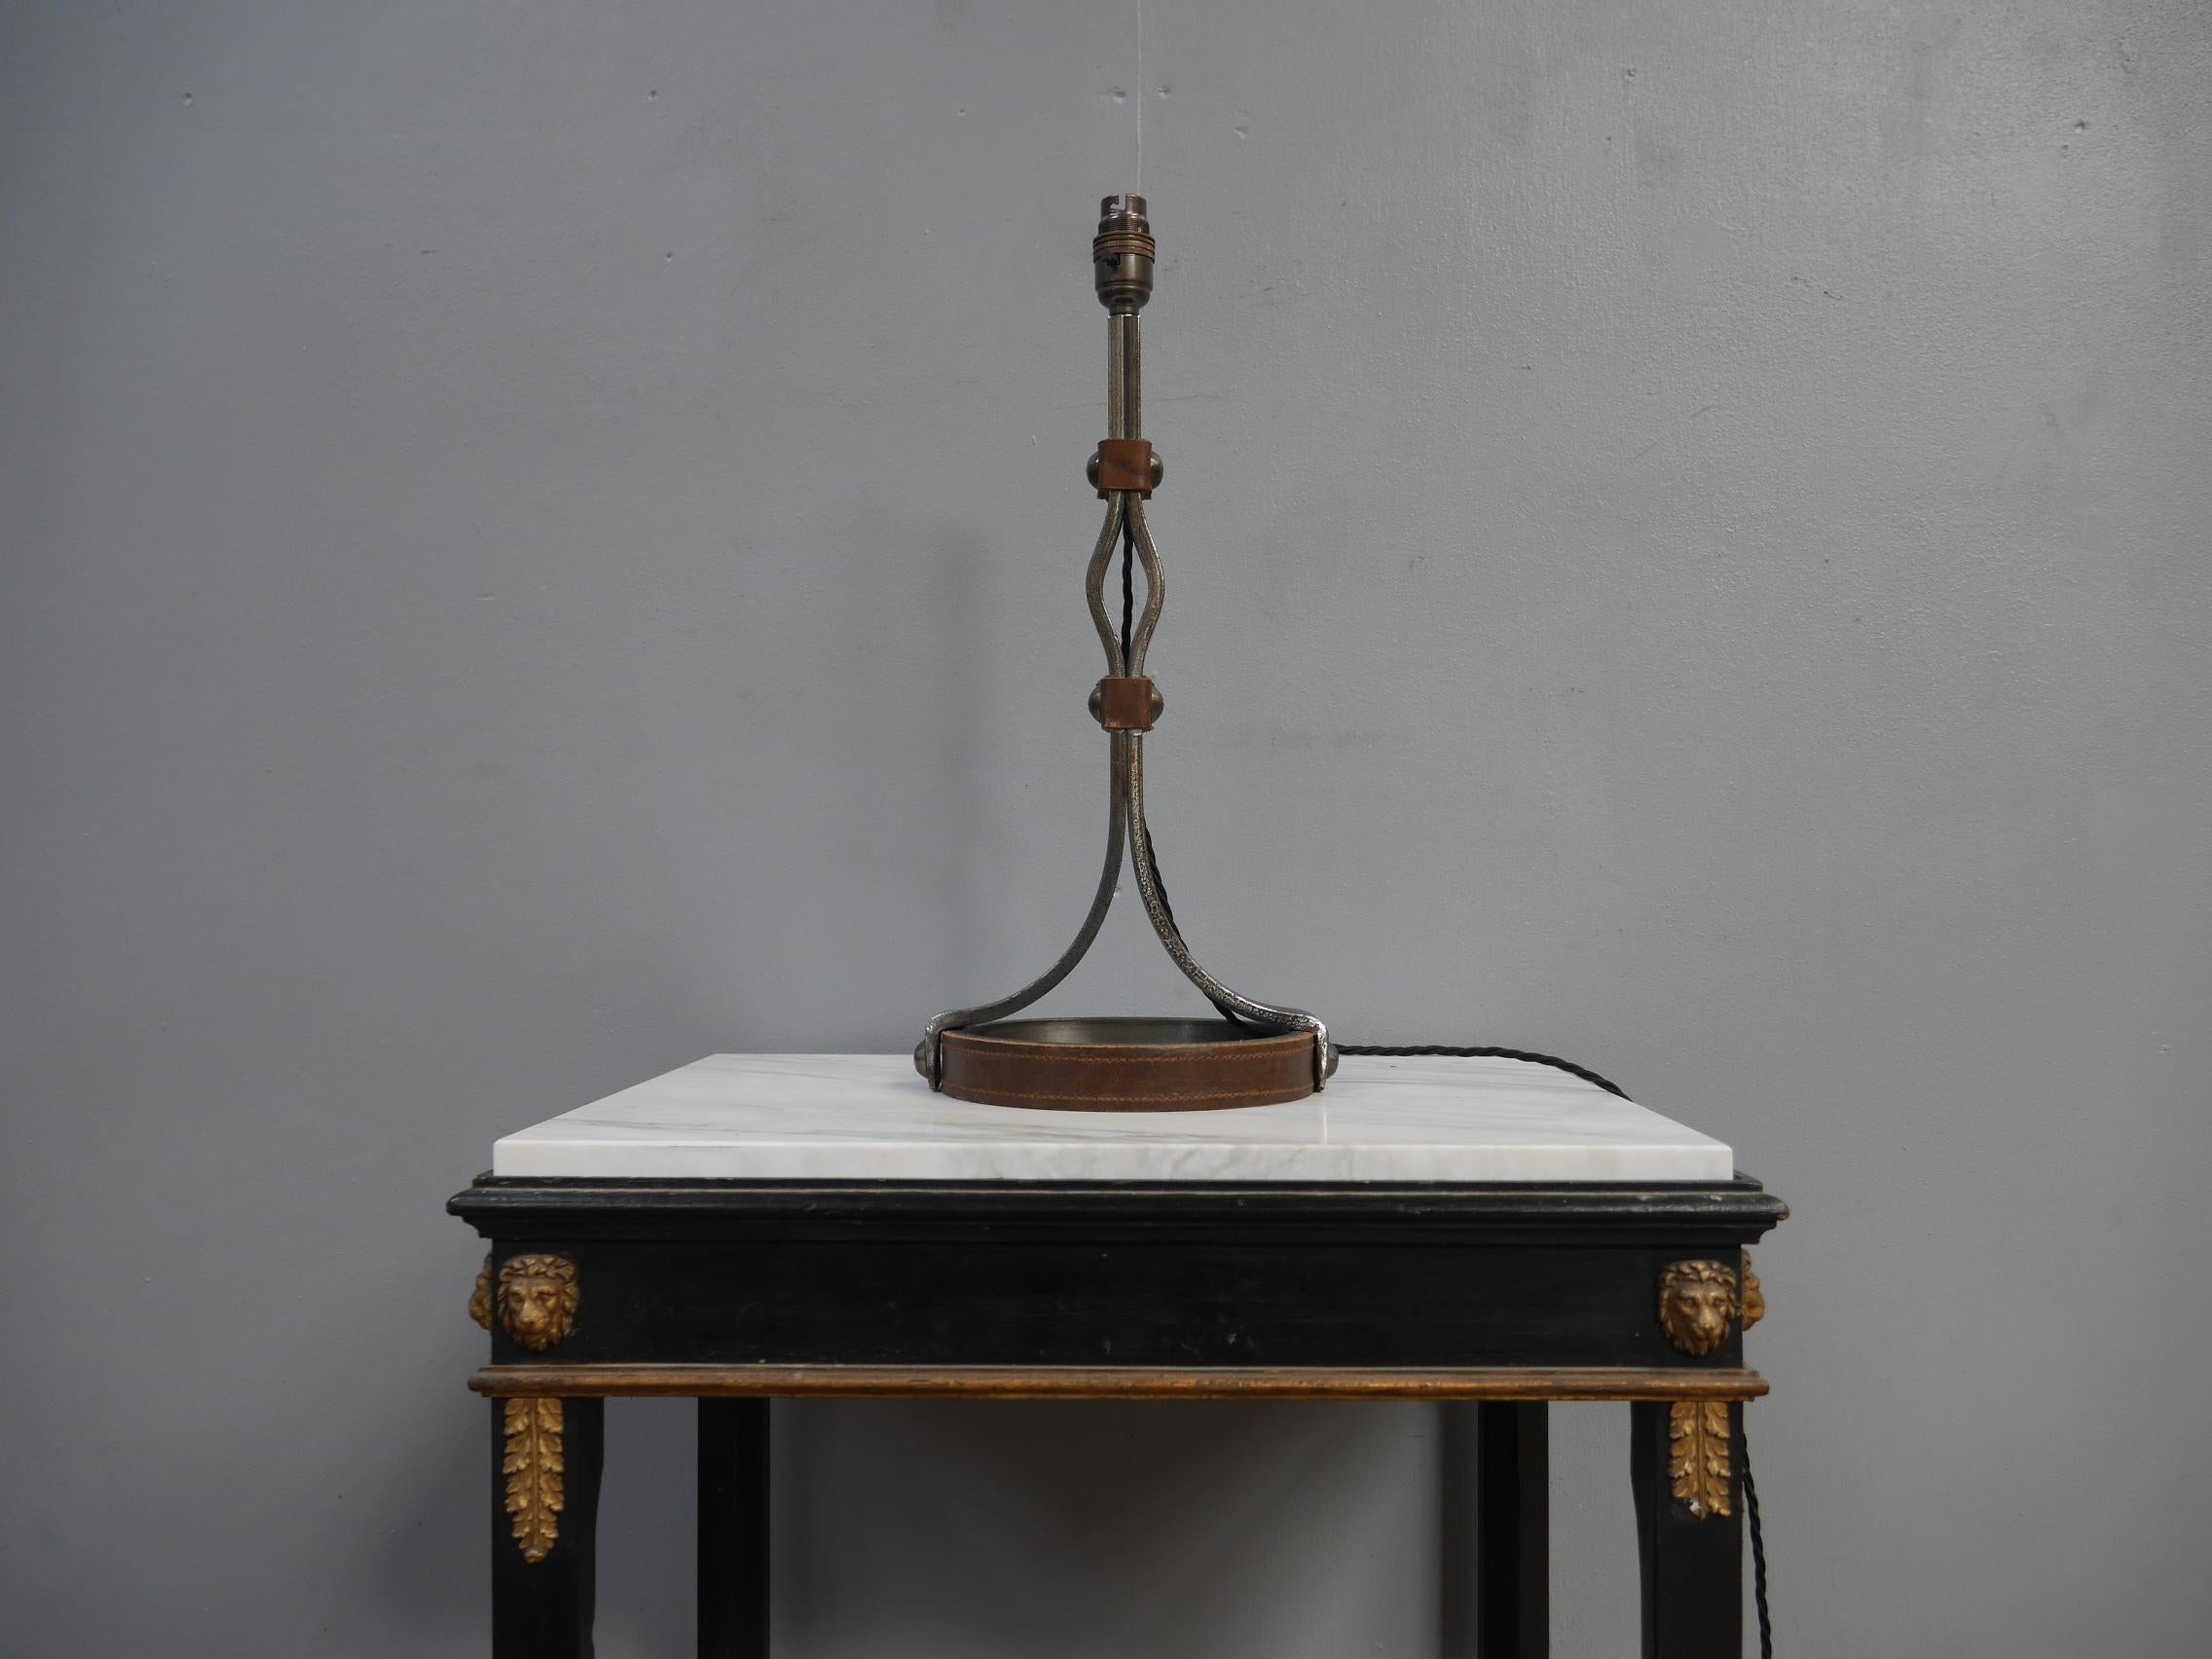 An iron & leather table lamp by Jean Pierre Ryckeart.
A beautiful piece of mid century design with the simple yet elegant lines in thick wrought iron with riveted leather banding to the upright and base.
An beautiful thing.
Wired in twisted black